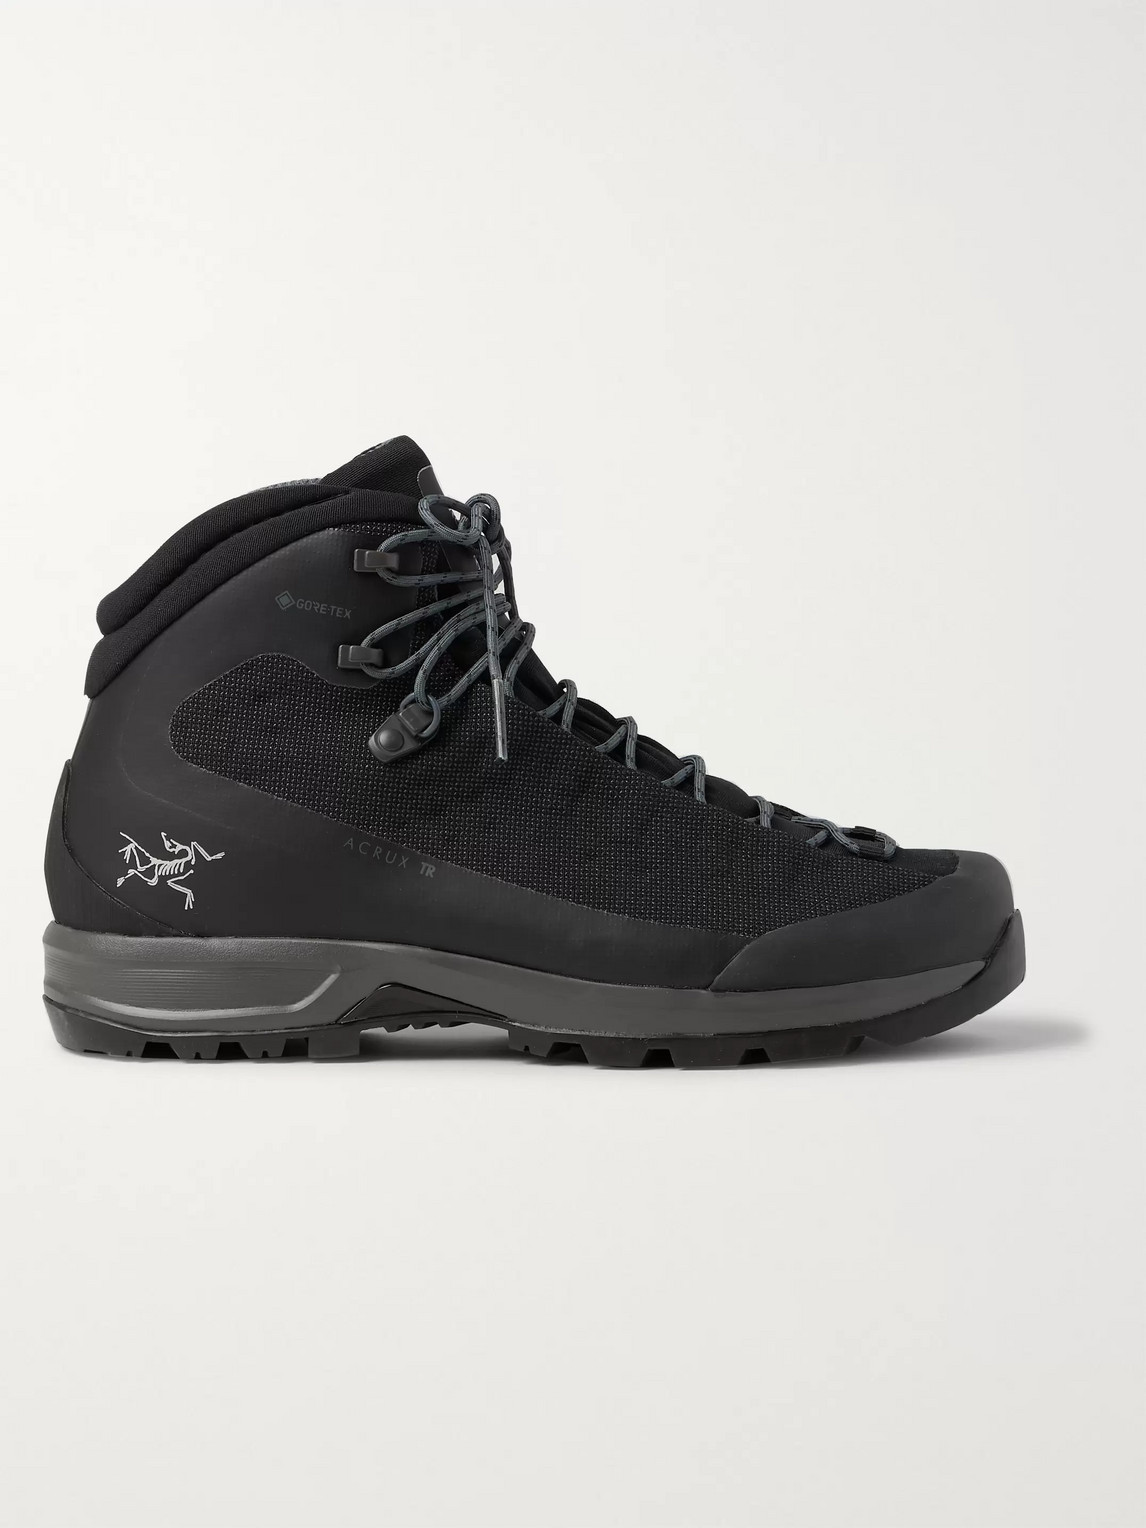 ARC'TERYX ACRUX TR GTX RUBBER-TRIMMED SUPERFABRIC AND GORE-TEX HIKING BOOTS